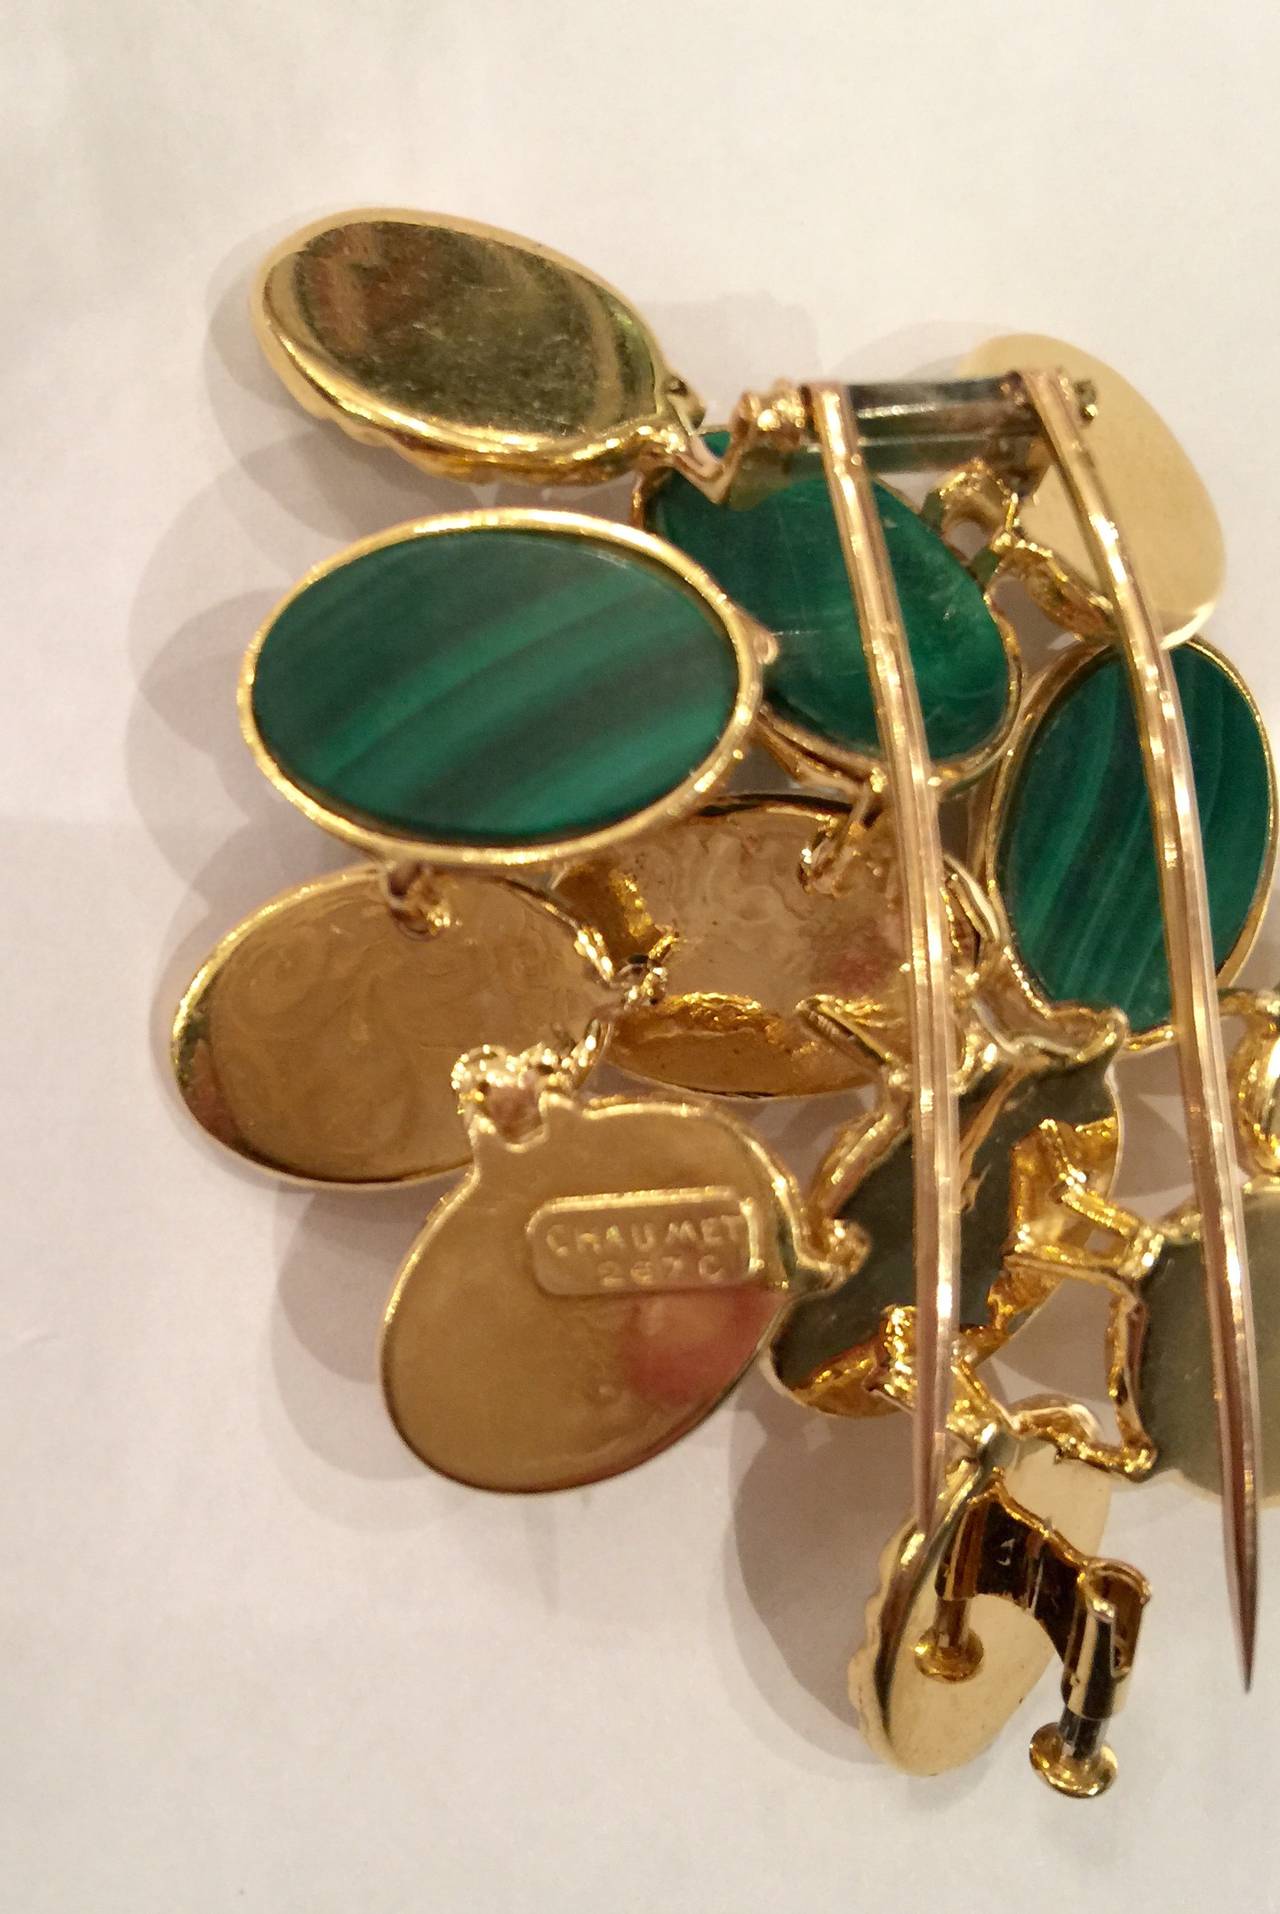 Contemporary 1970s Chaumet Malachite Textured Gold Brooch